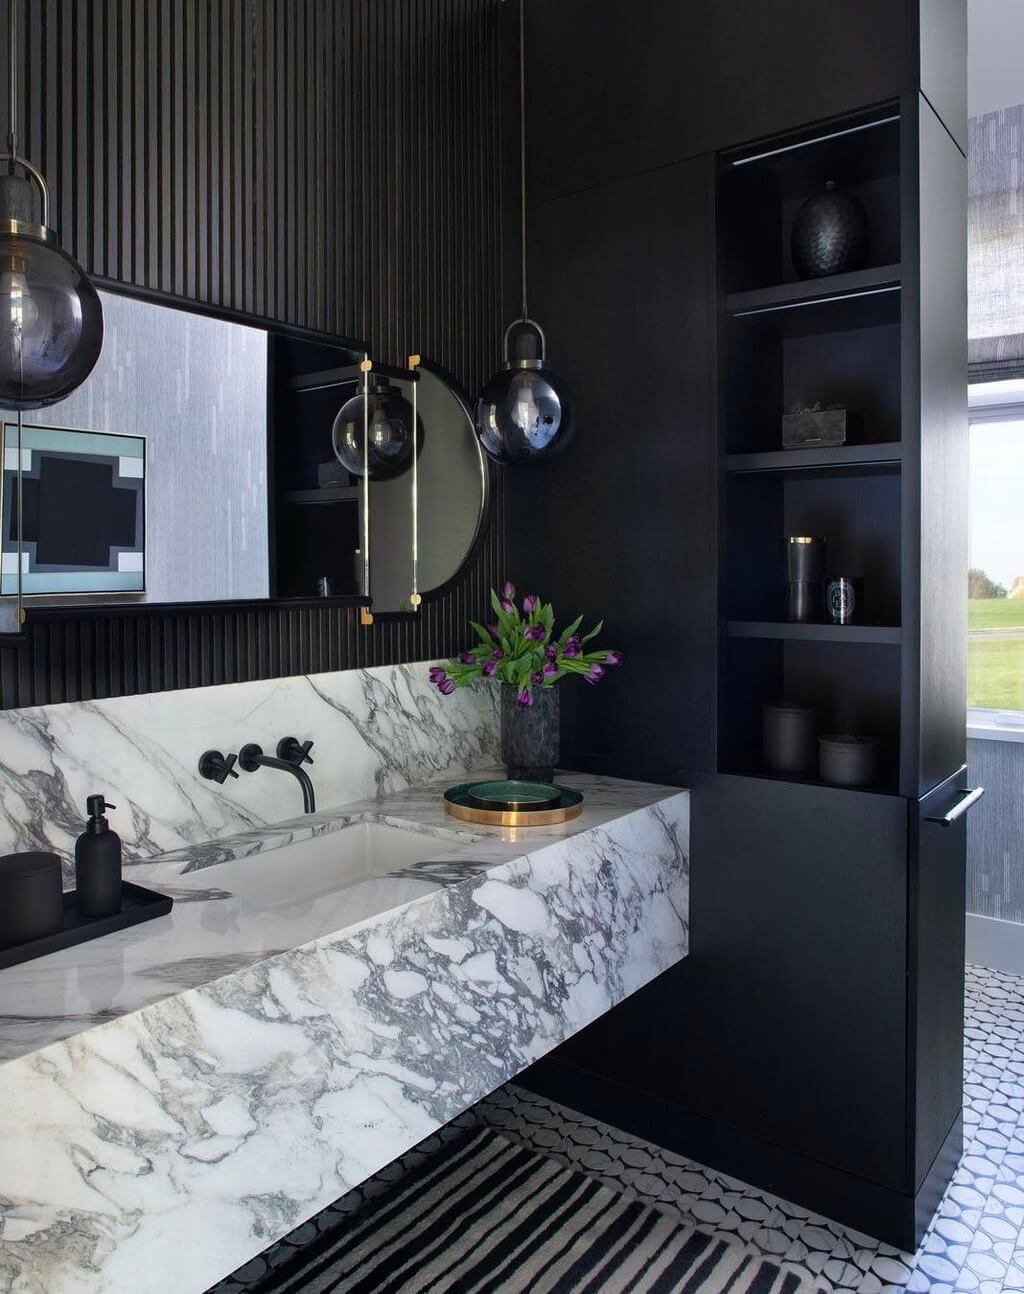 A black and white bathroom with a marble sink
